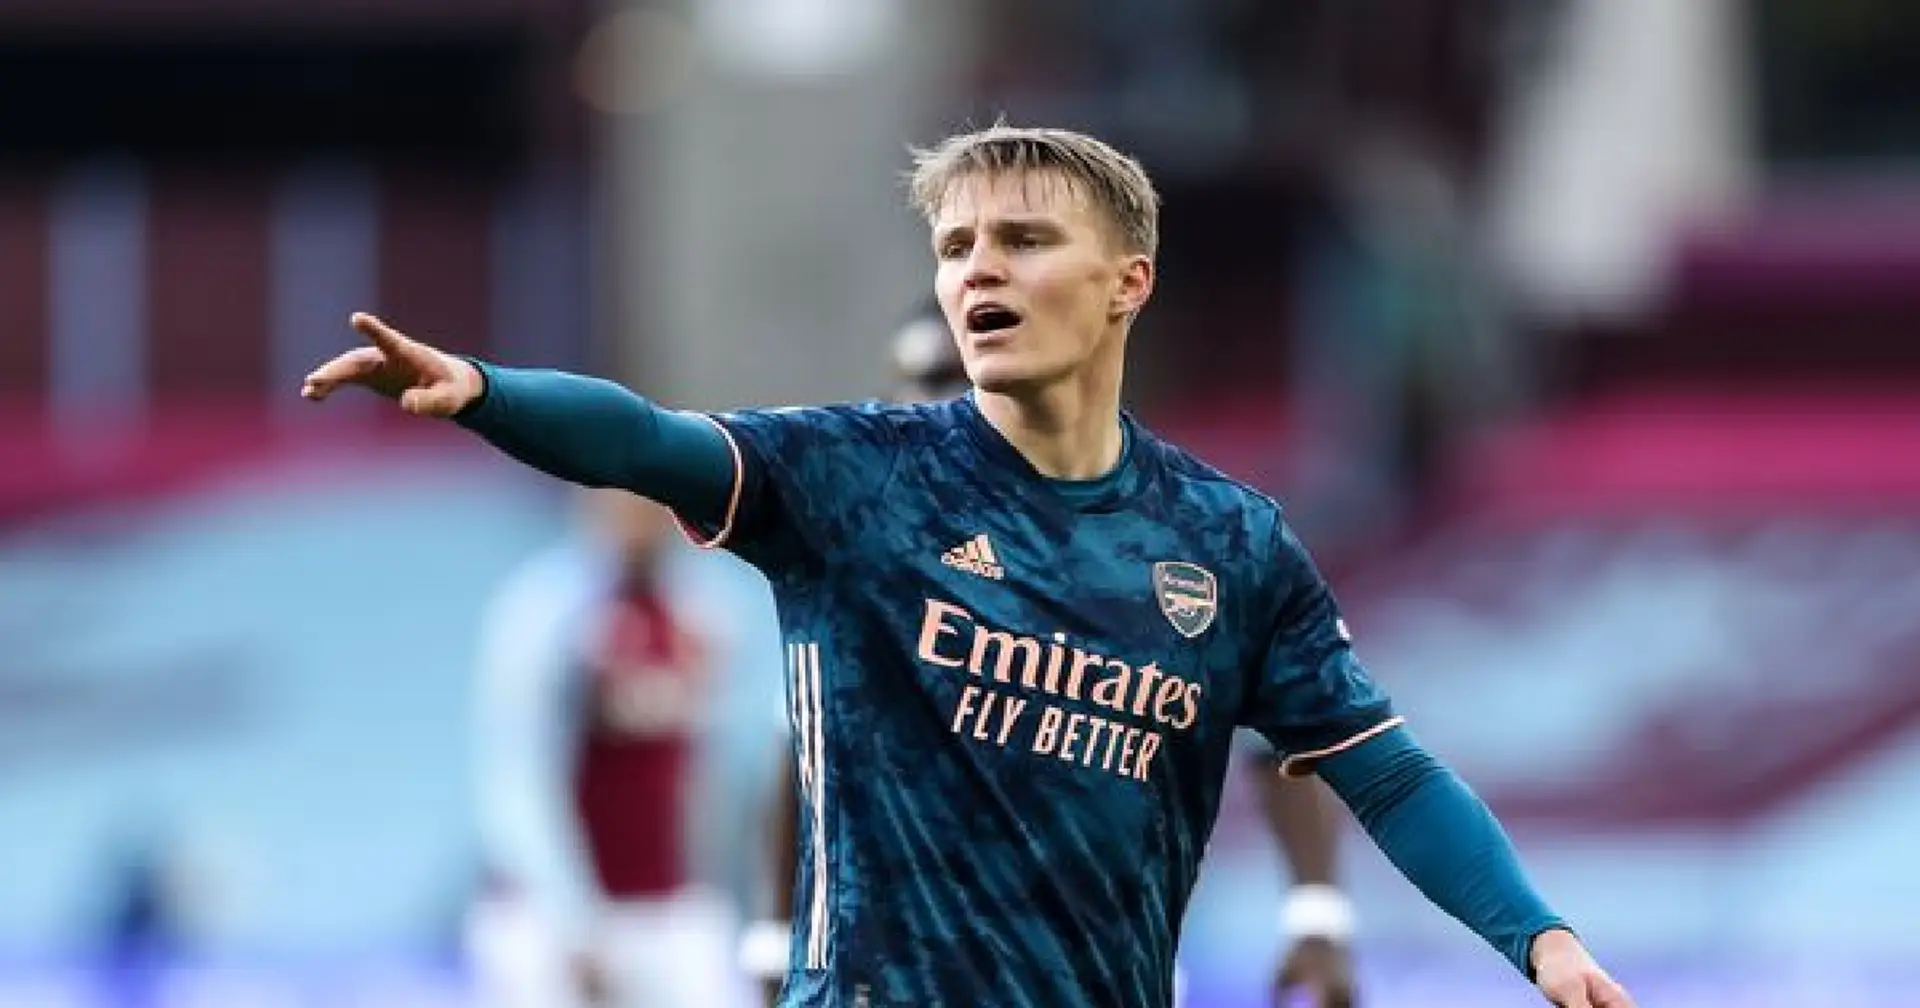 Martin Odegaard lights up London again with a brilliant display for Arsenal